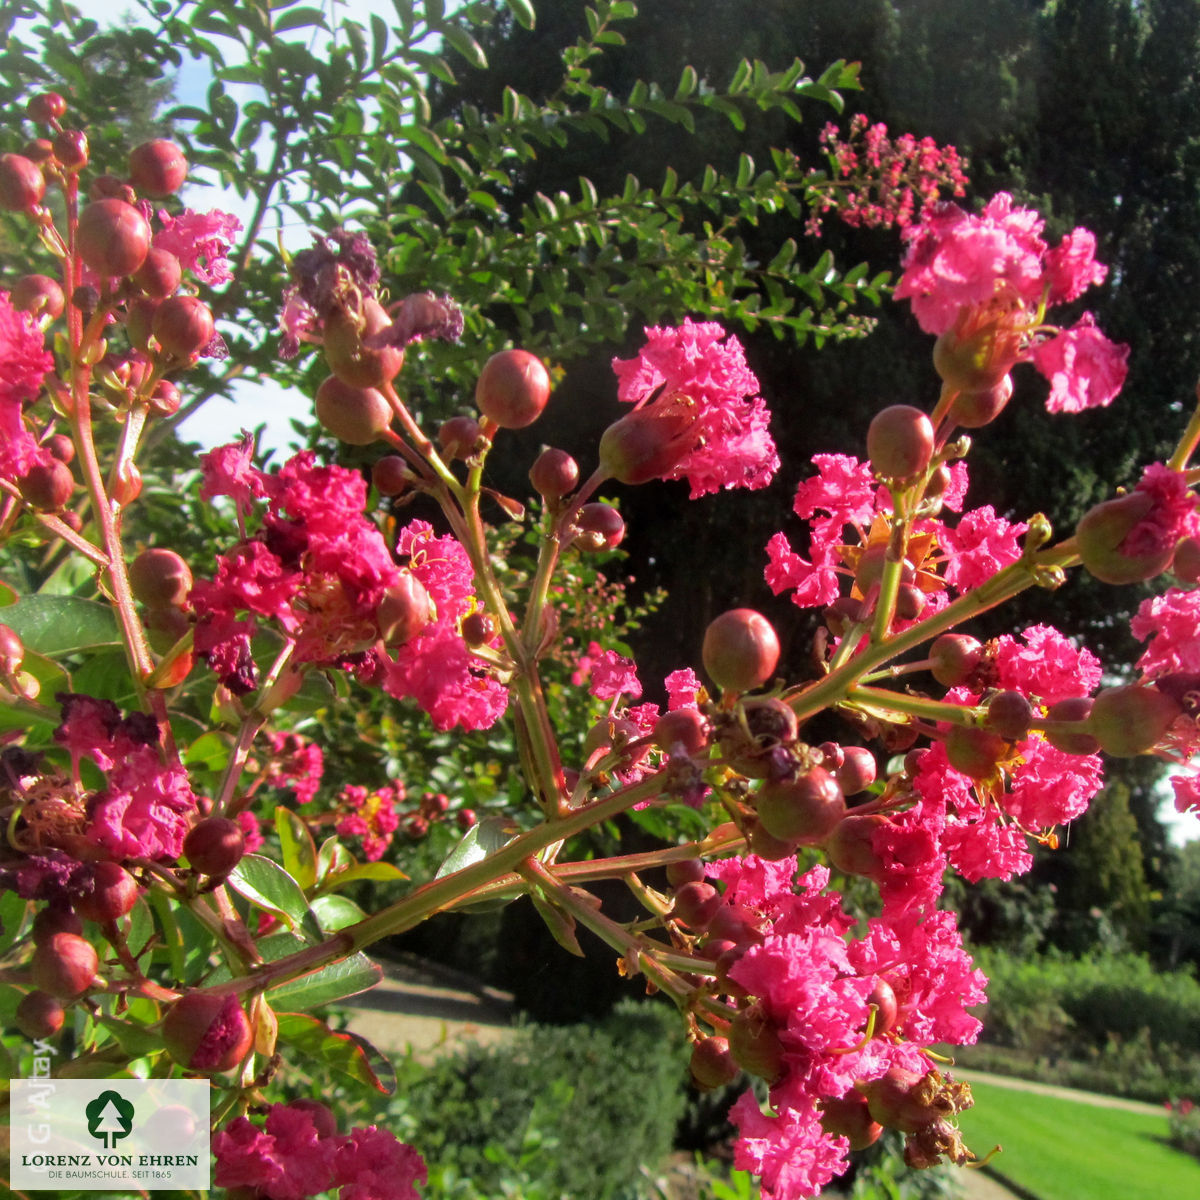 Lagerstroemia indica 'in Farben'